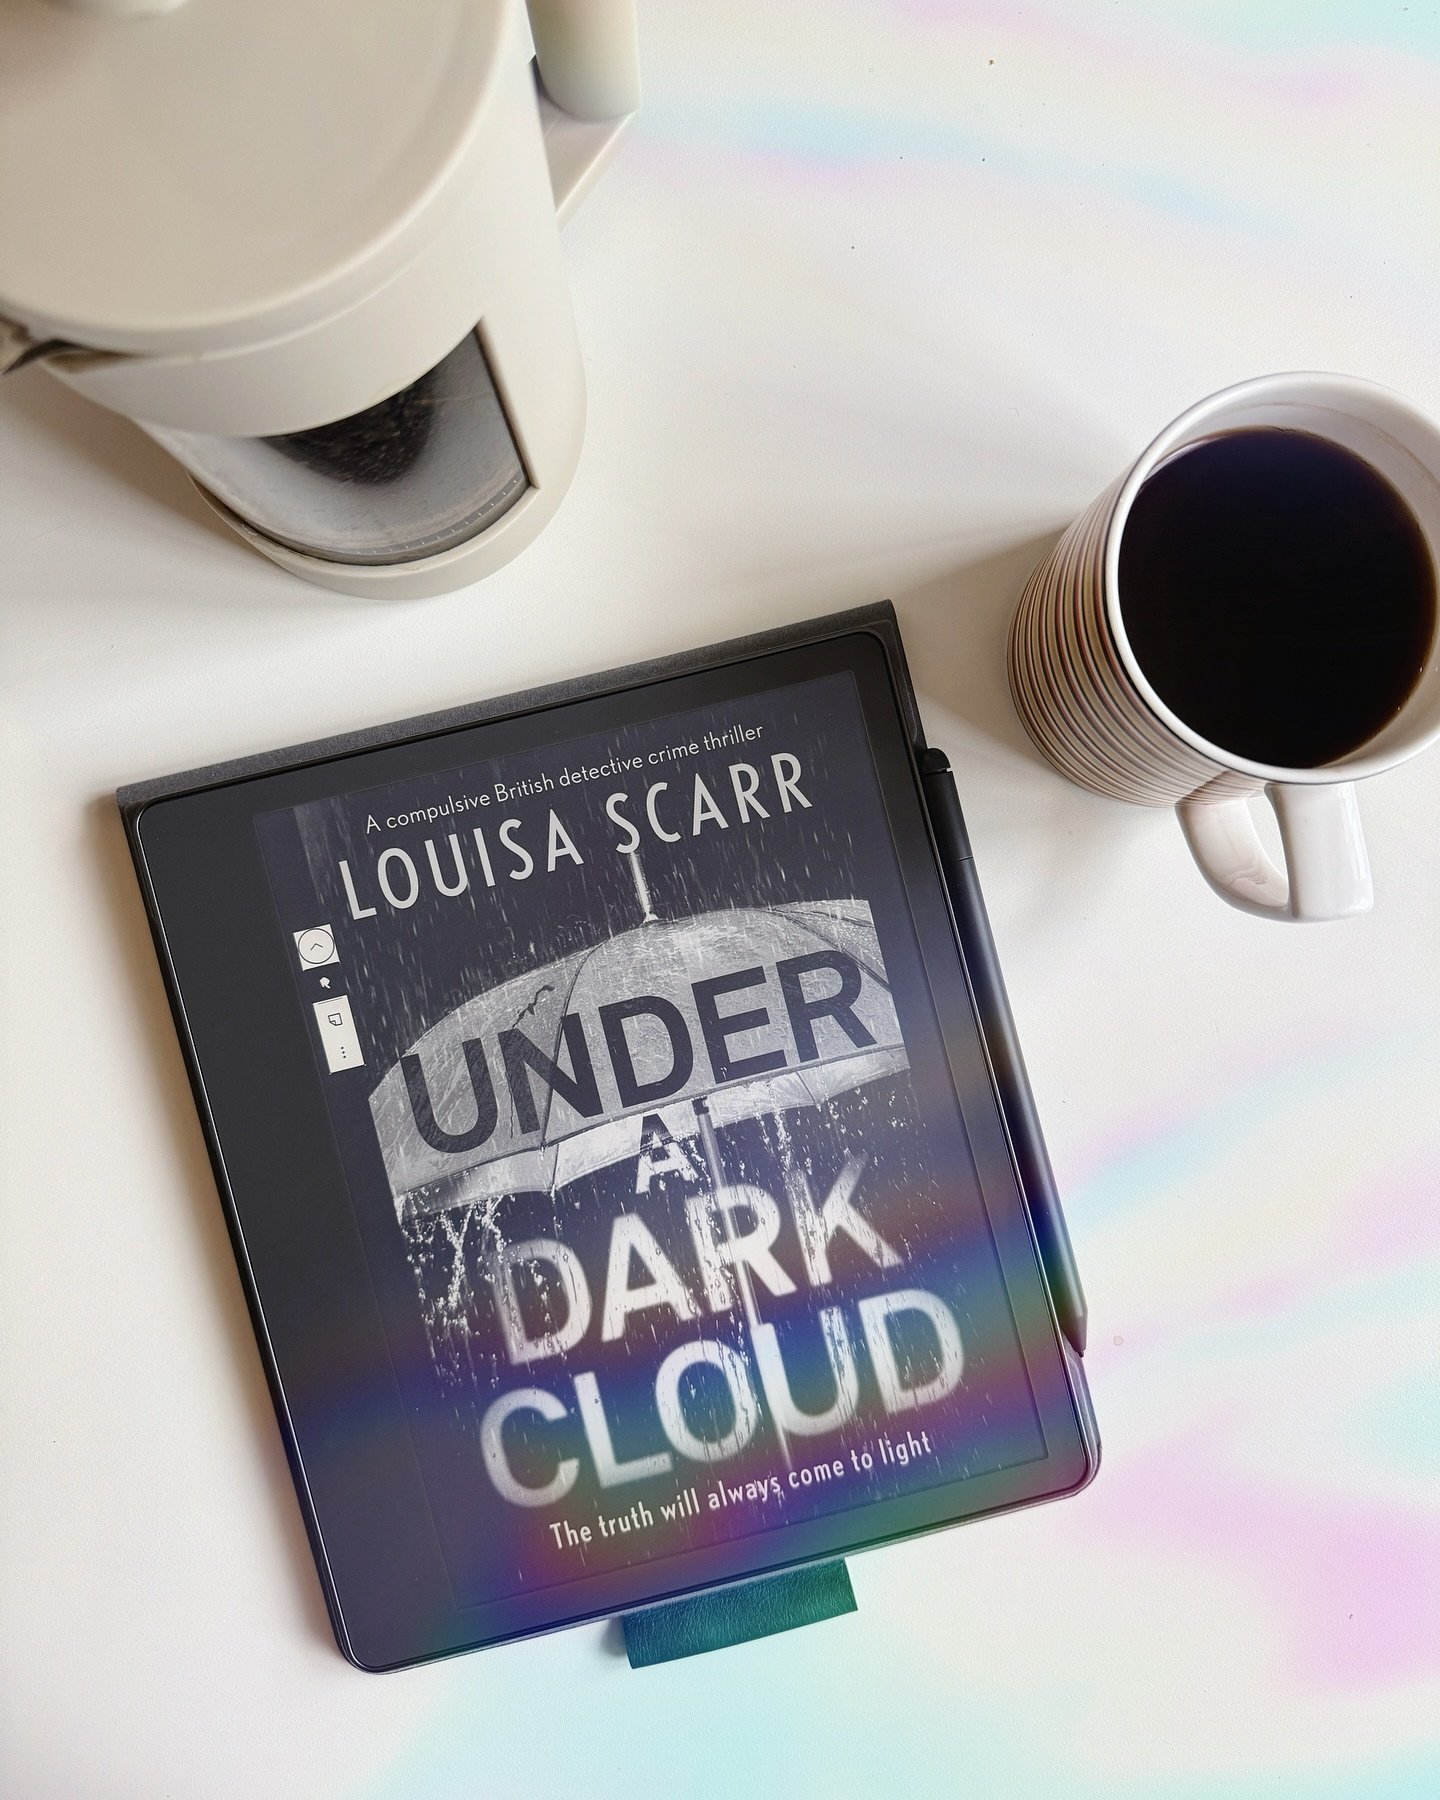 The second book in the Butler and West series by @louisascarrwriter. I LOVE this series! The crimes are unusual, the investigations are unpredictable, and Robin and Freya, the two lead police officers, are characters I really care about. (I want them